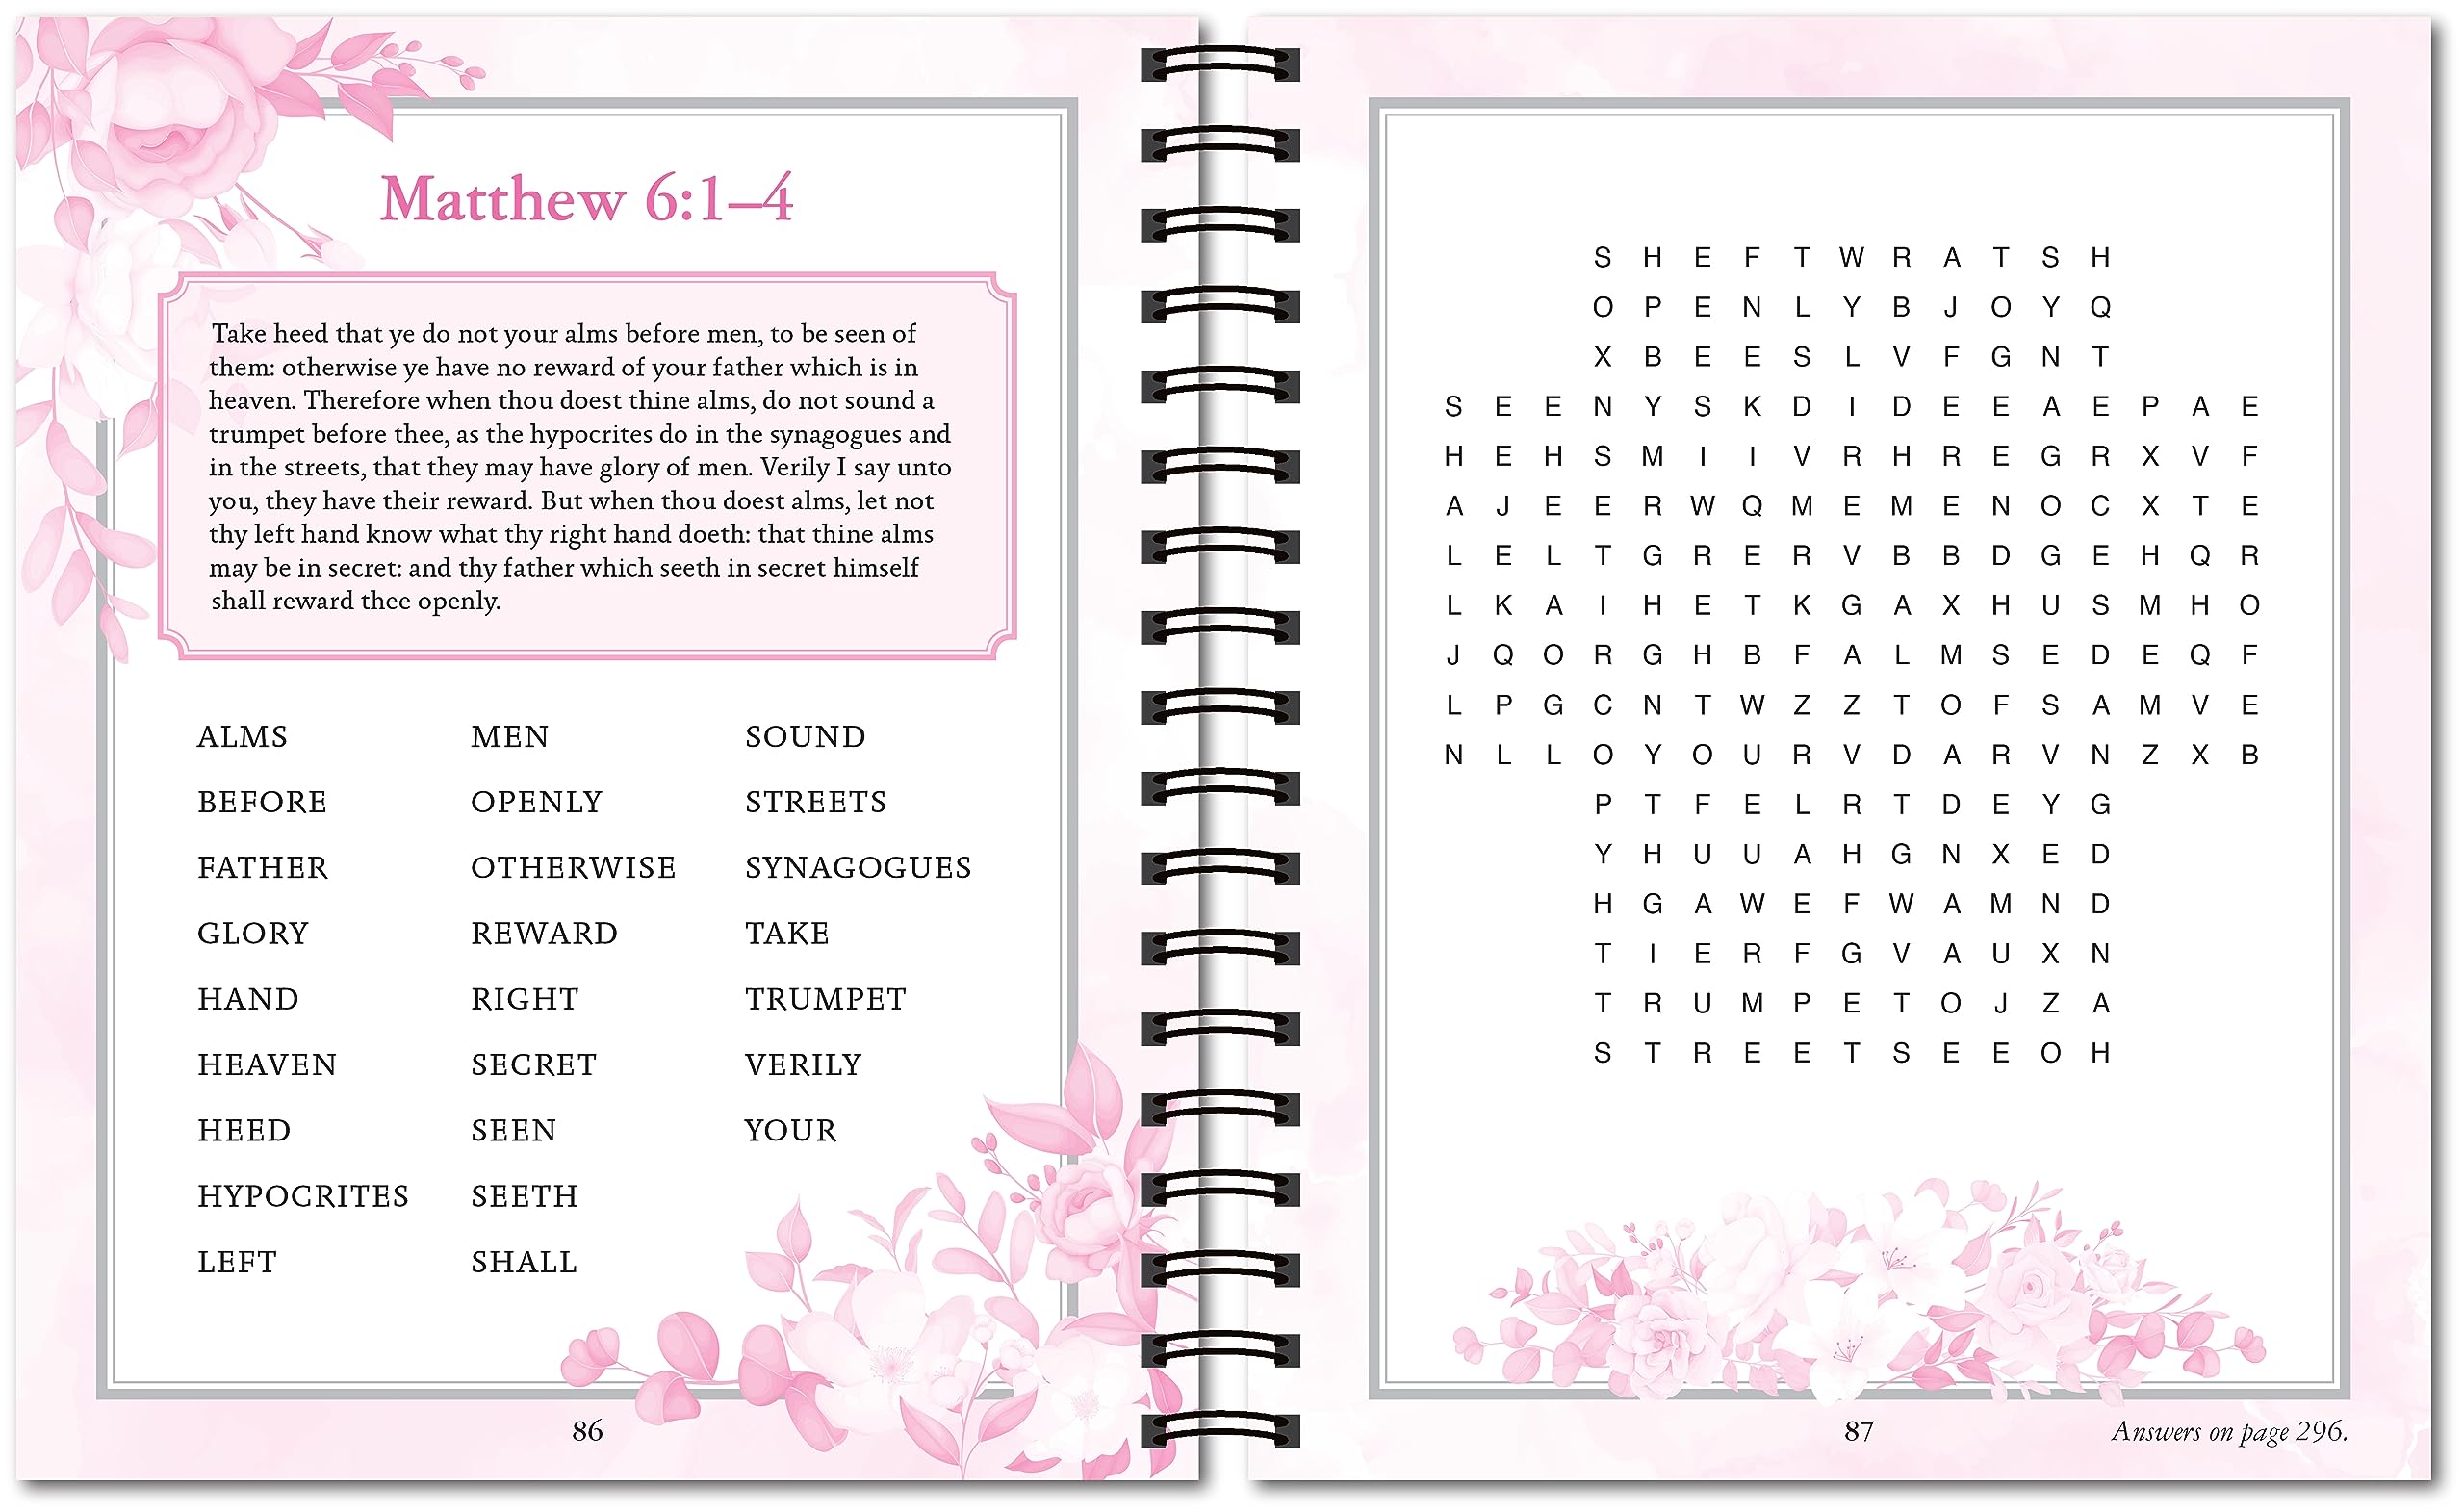 Brain Games - Words of Jesus Word Search Puzzles (320 Pages) (Brain Games - Bible)